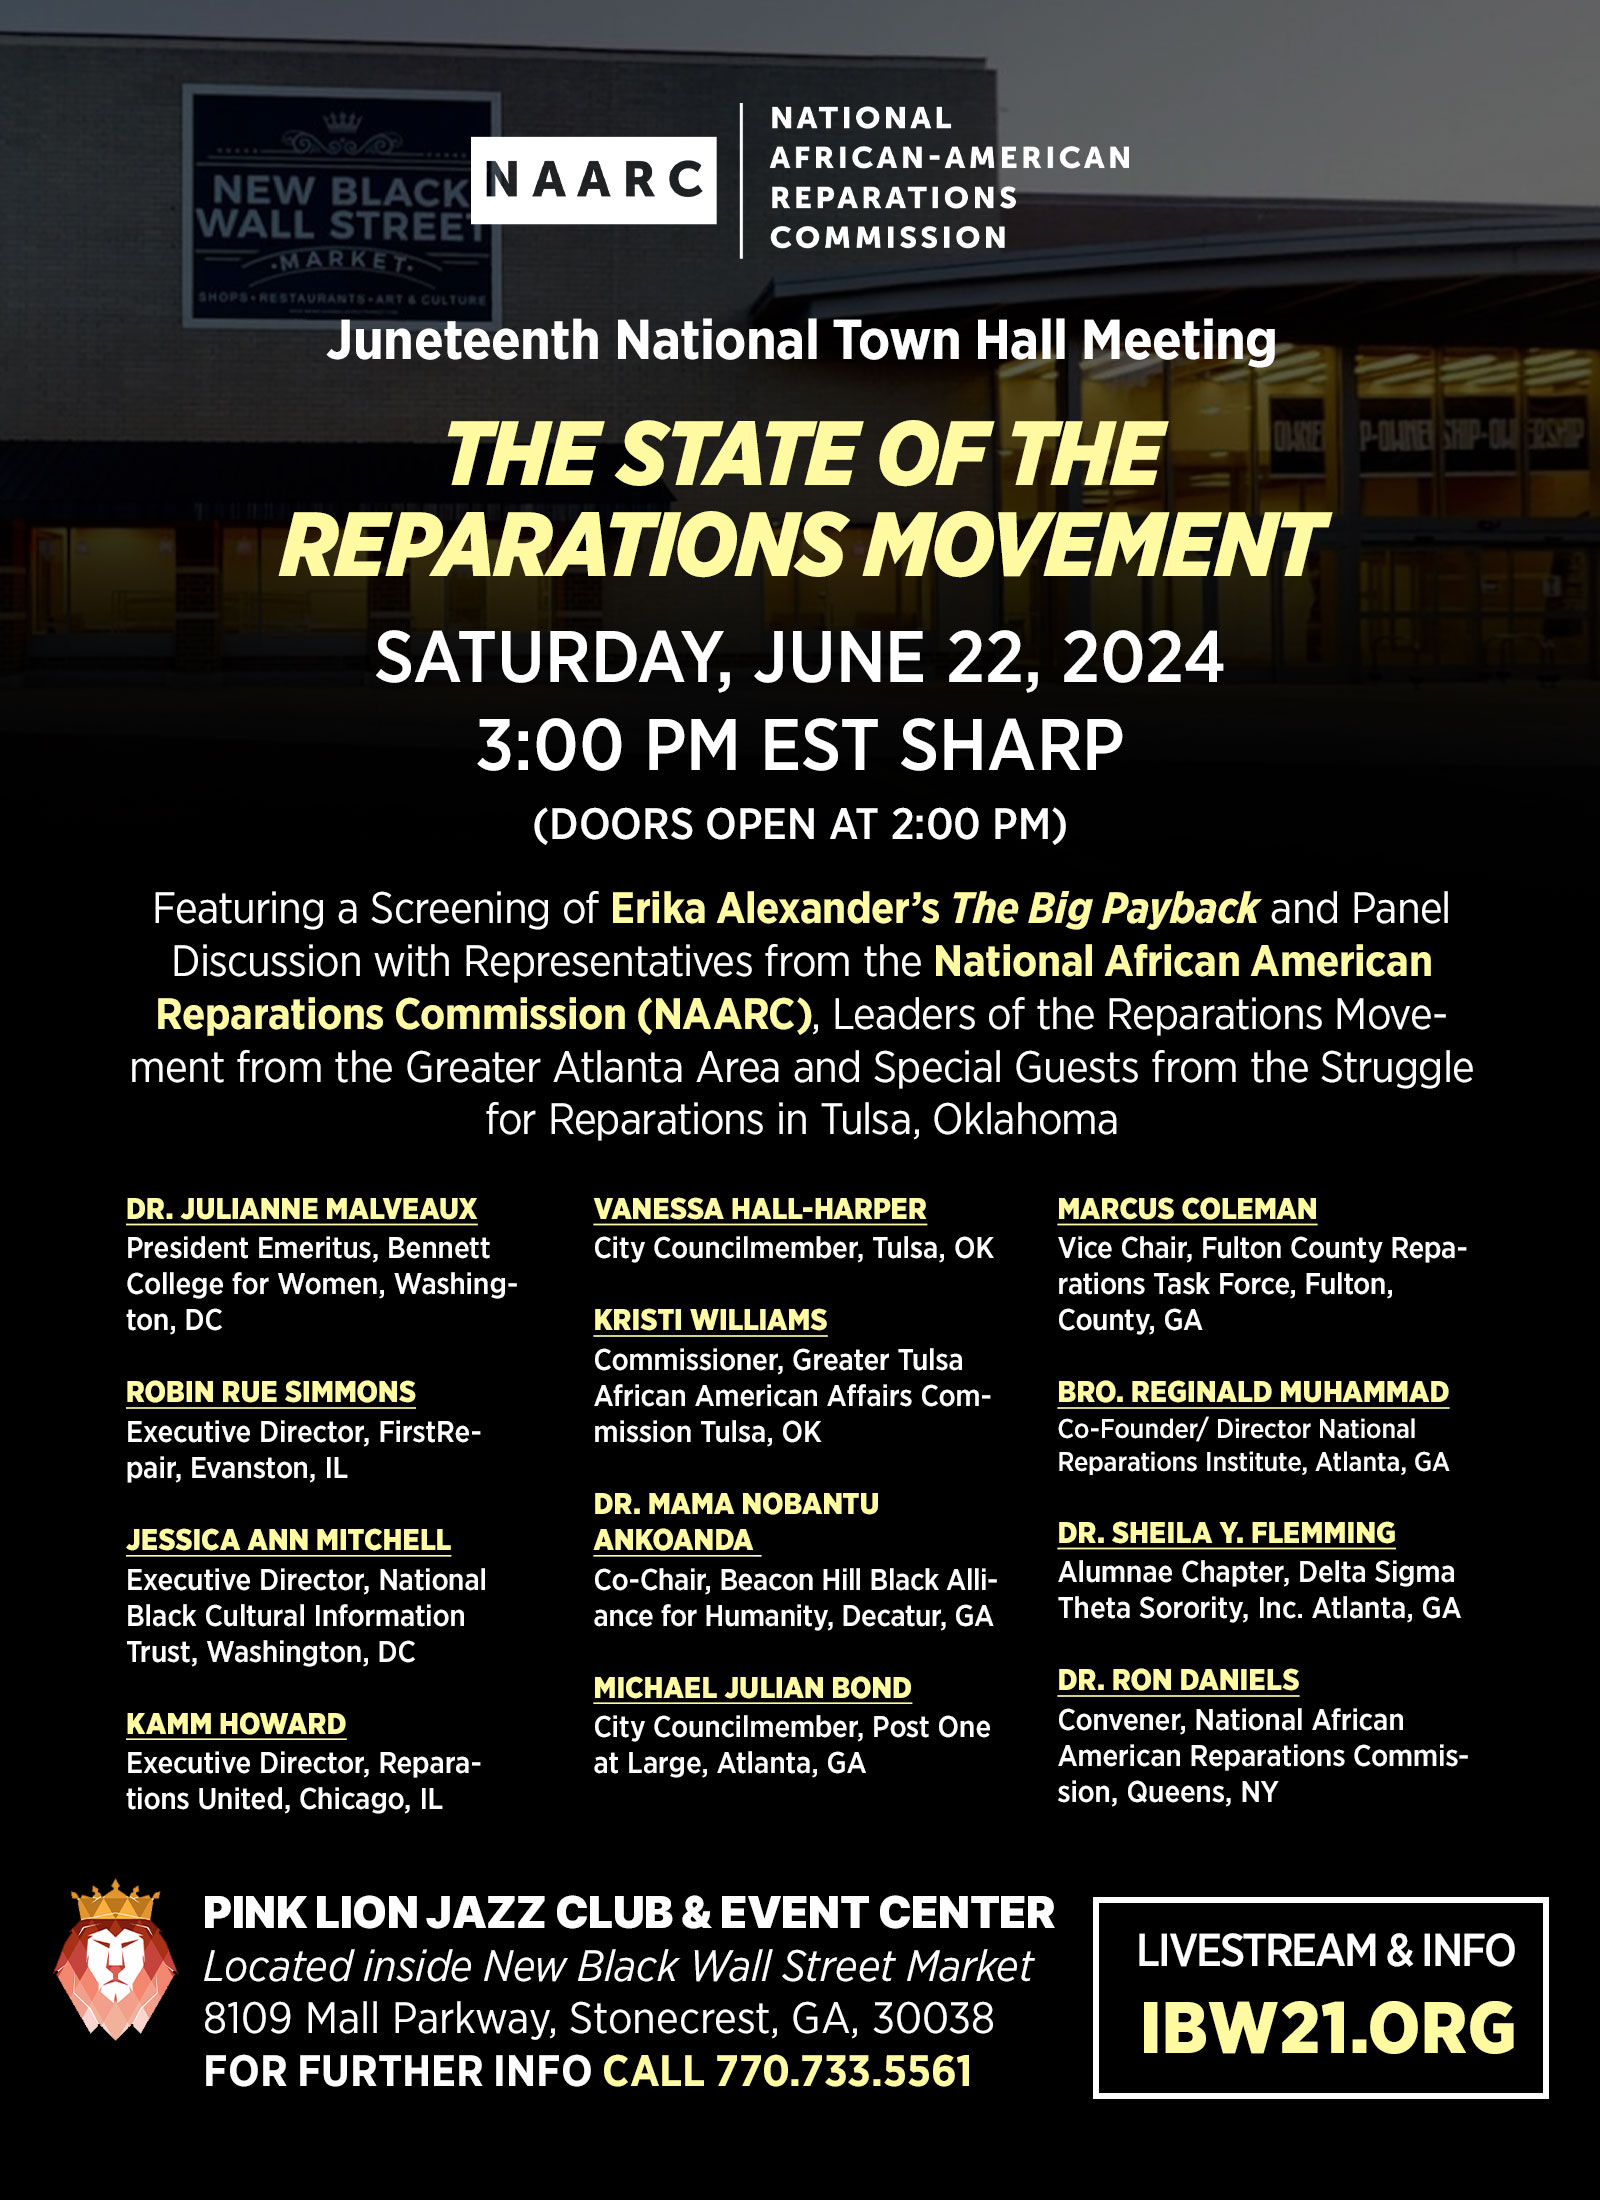 June 22, 2024 — National Town Hall Meeting "The State of the Reparations Movement" Featuring a Screening of Erika Alexander’s The Big Payback and Panel Discussion with Representatives from the National African American Reparations Commission (NAARC) and Leaders of the Reparations Movement from the Greater Atlanta Area with Special Guests from the Struggle for Reparations in Tulsa, Oklahoma.